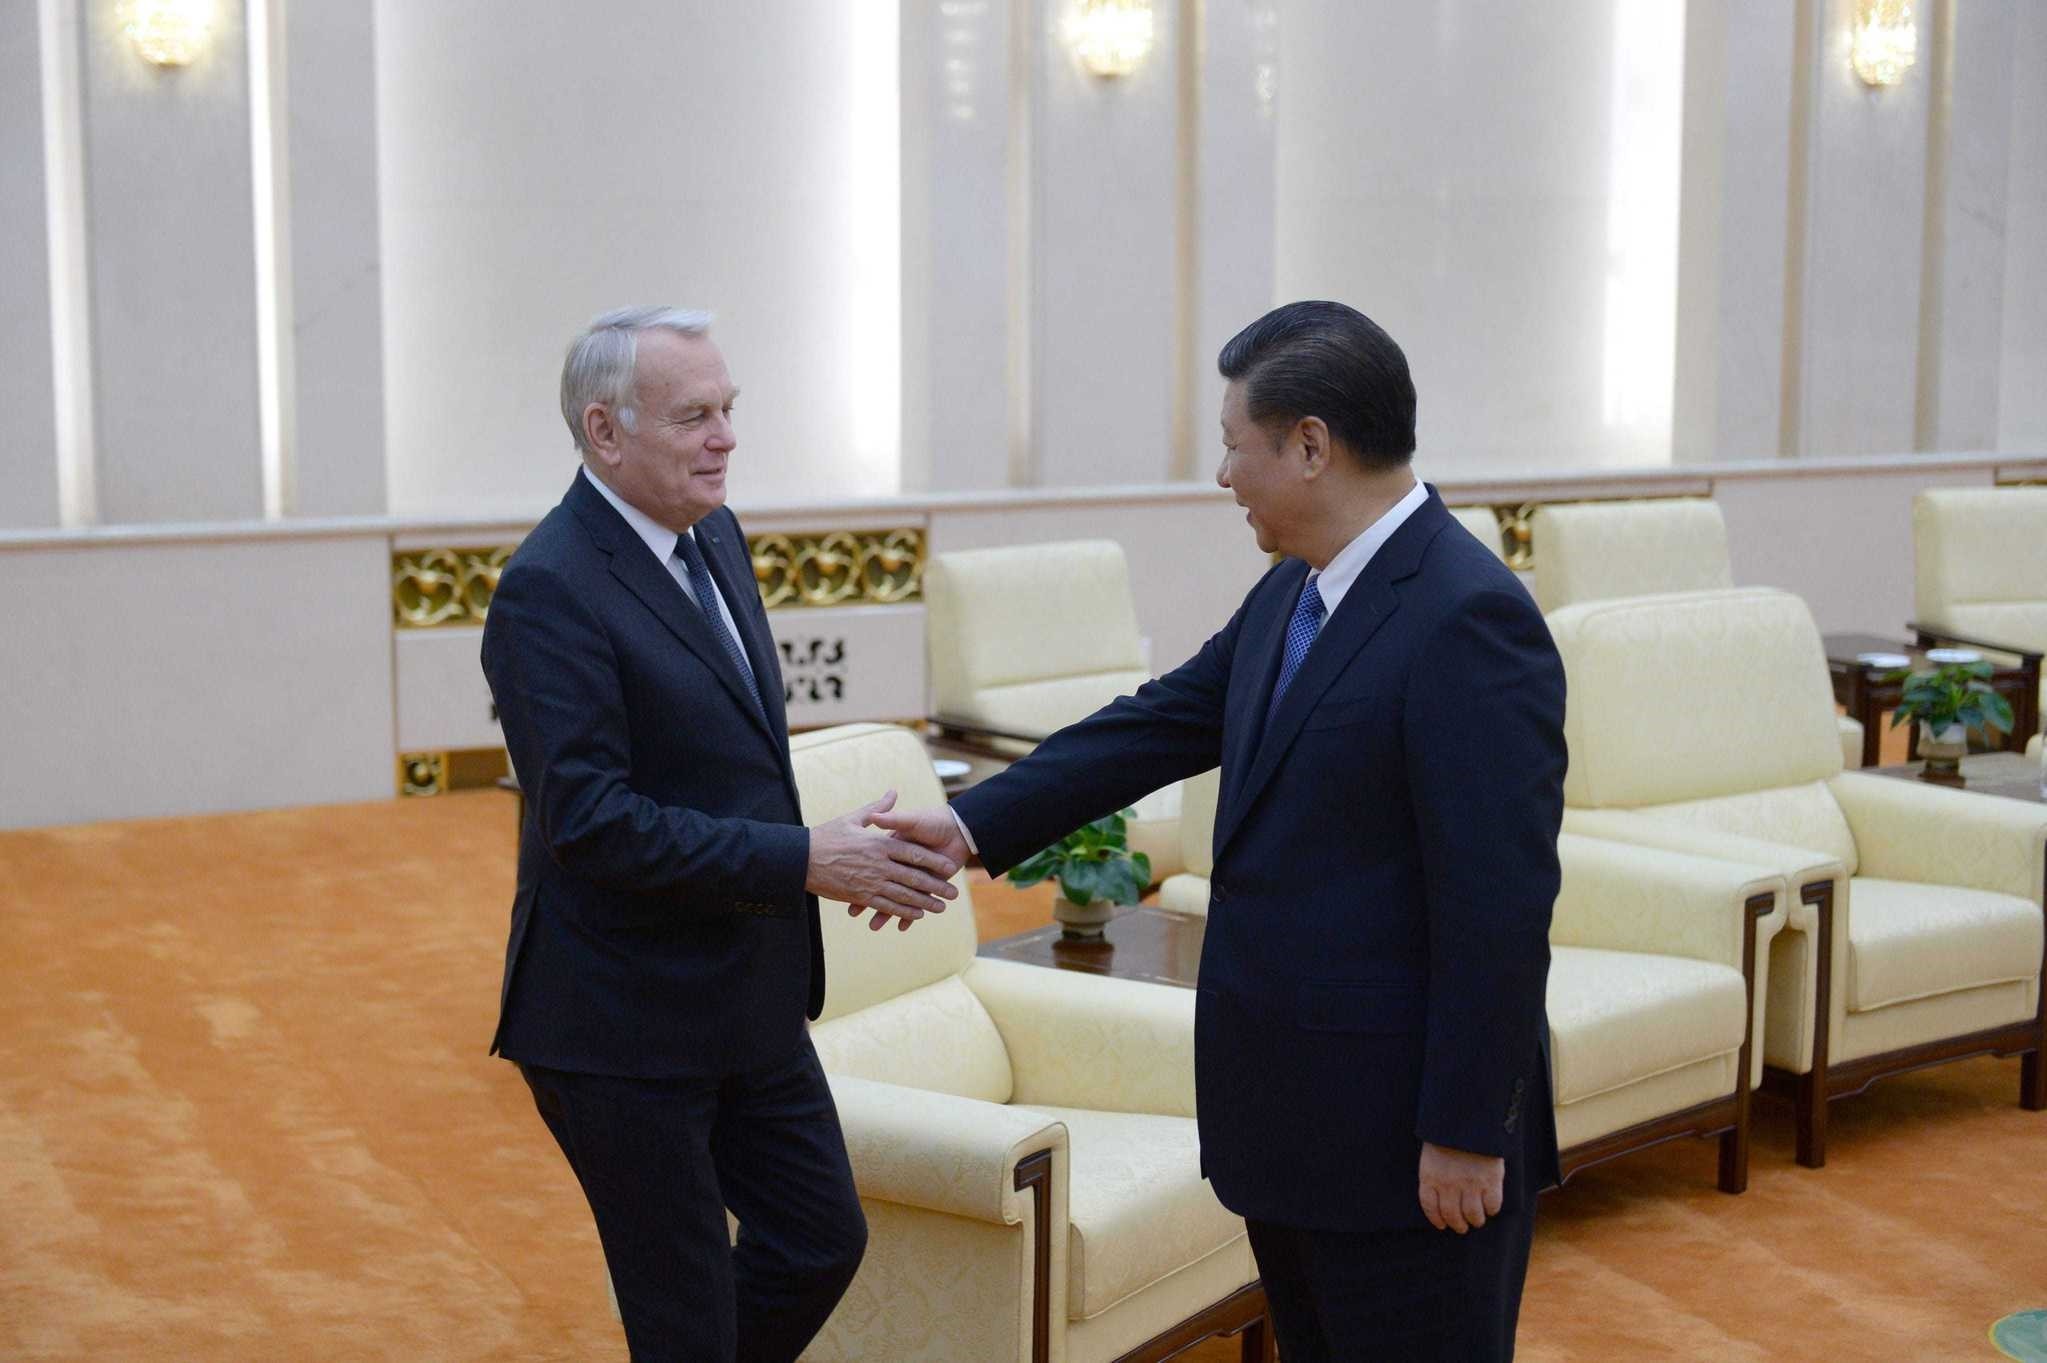 Chinese President Xi Jinping (R) shakes hands with French Foreign Minister Jean-Marc Ayrault ahead of their meeting at the Great Hall of the People in Beijing. The French foreign minister is on an official visit to China.